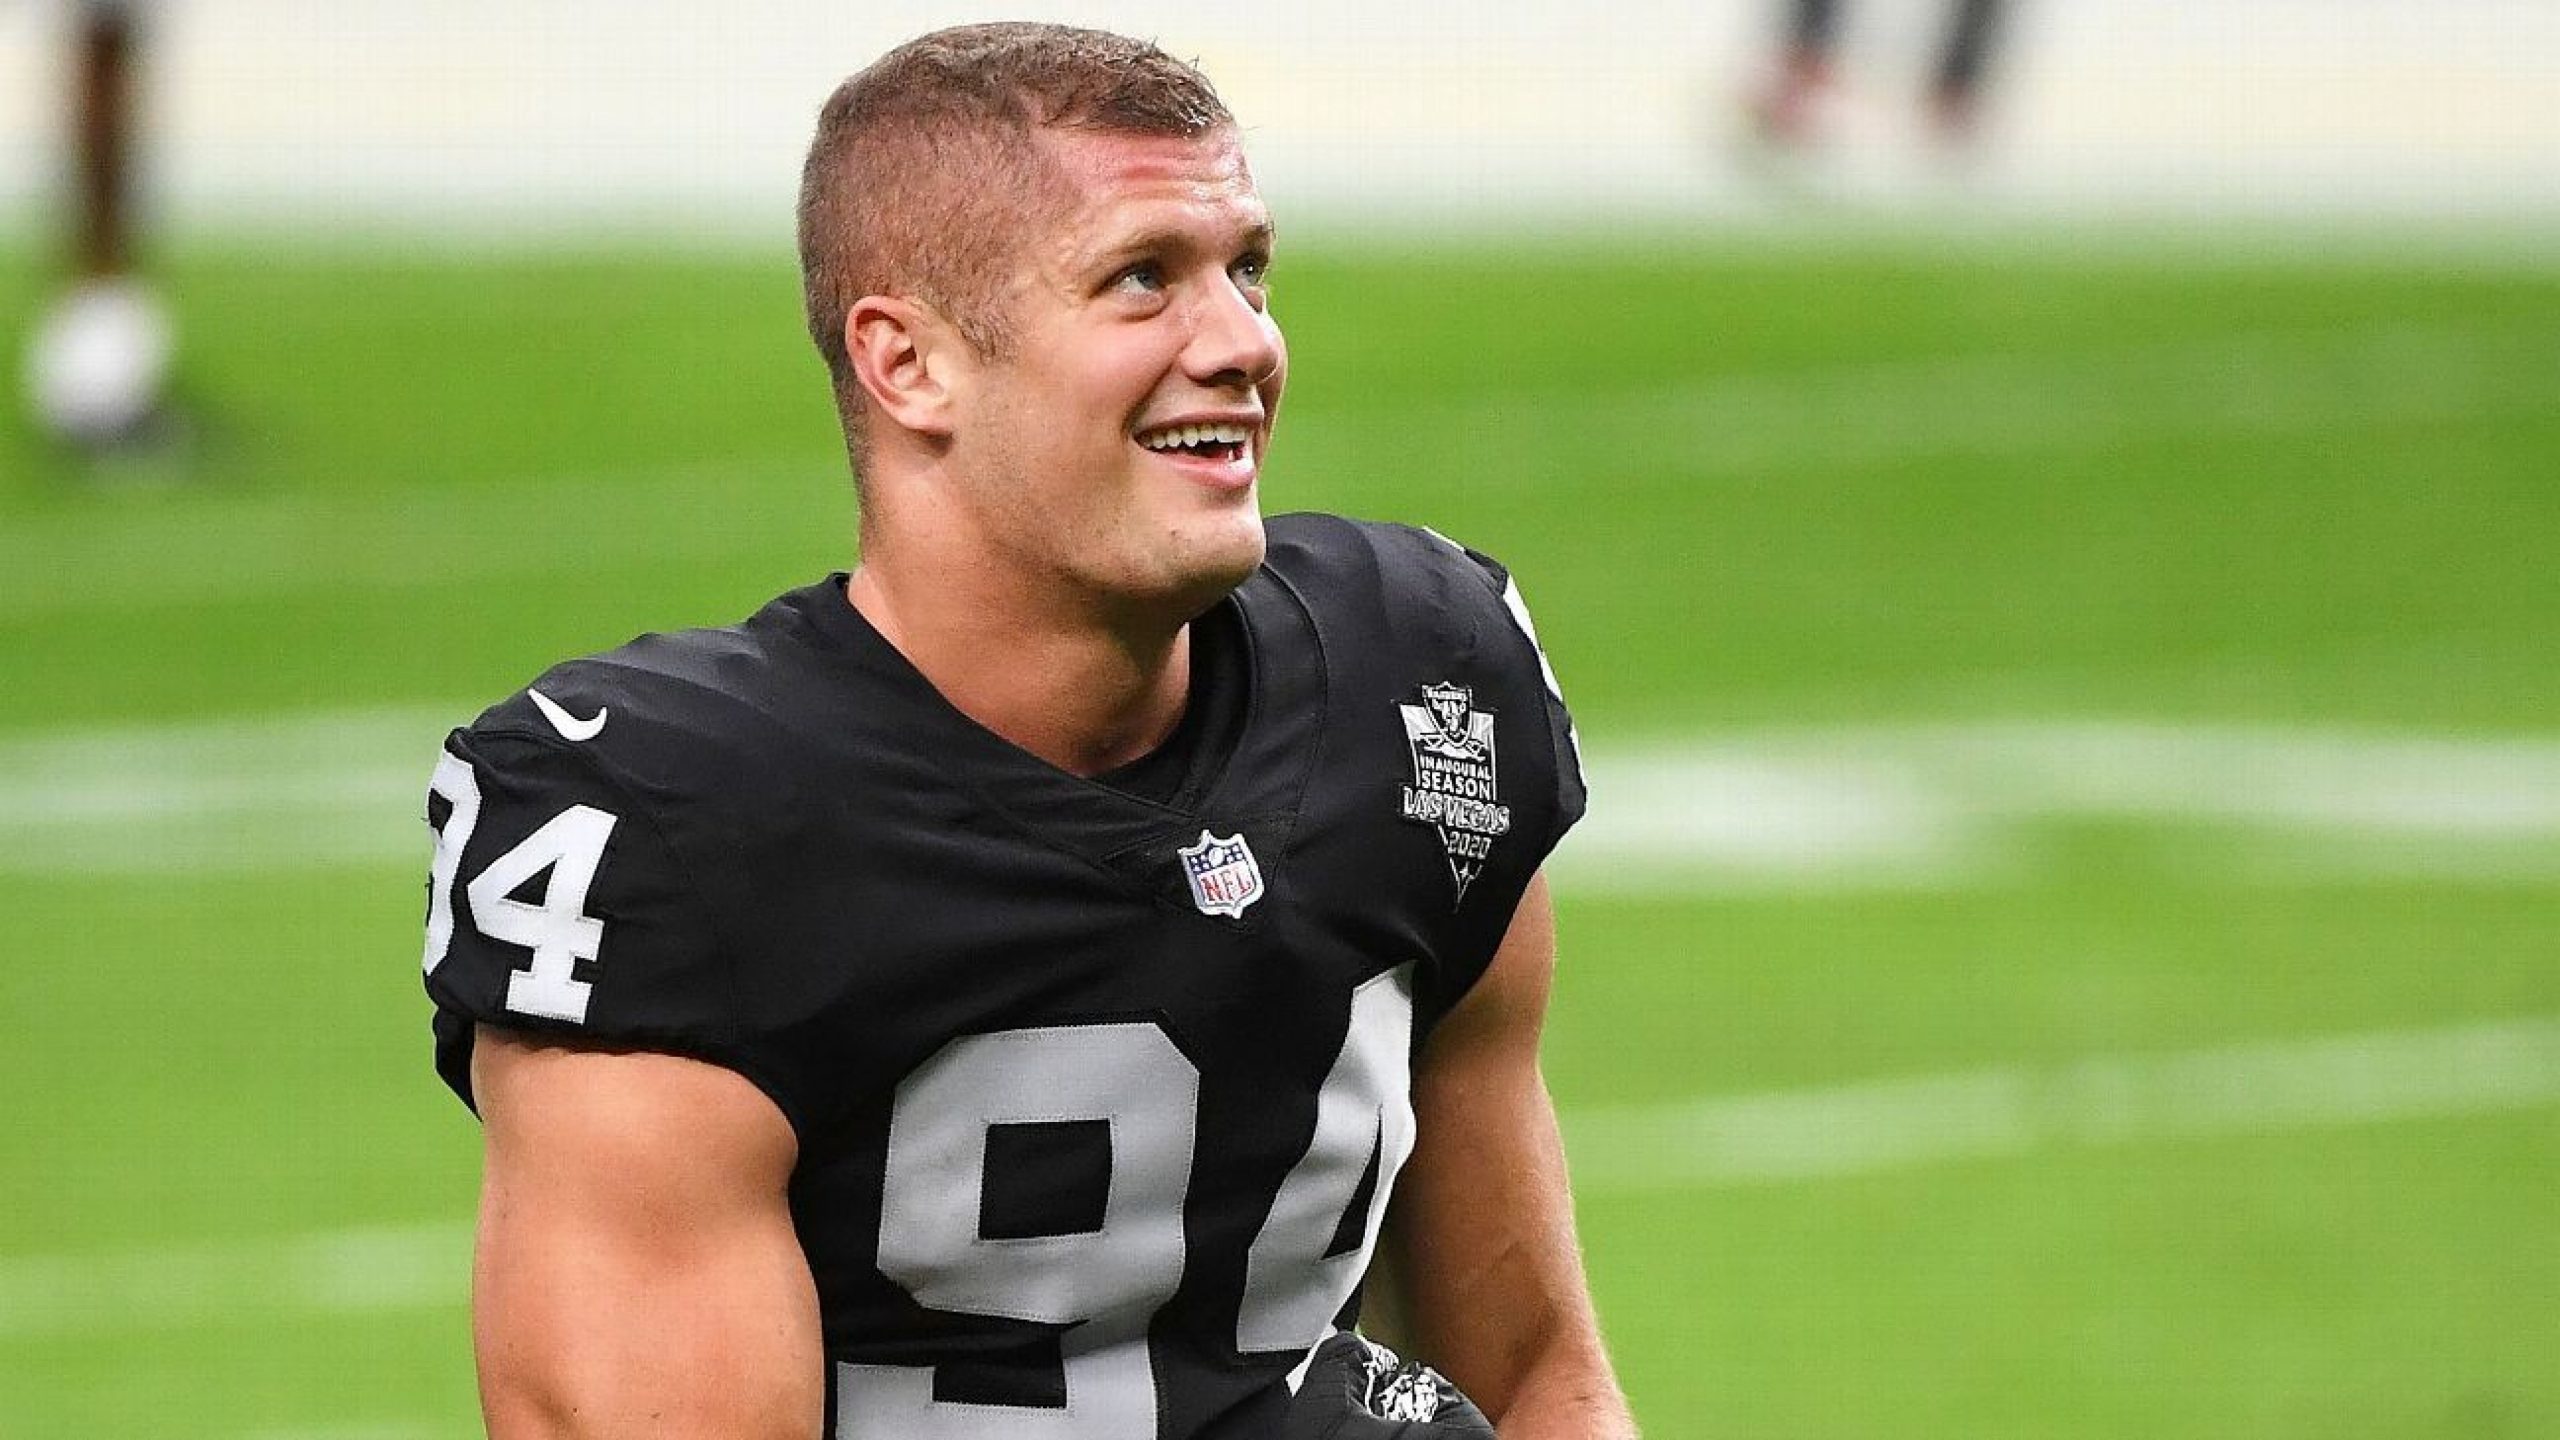 Nassib first active NFL player to come out as gay